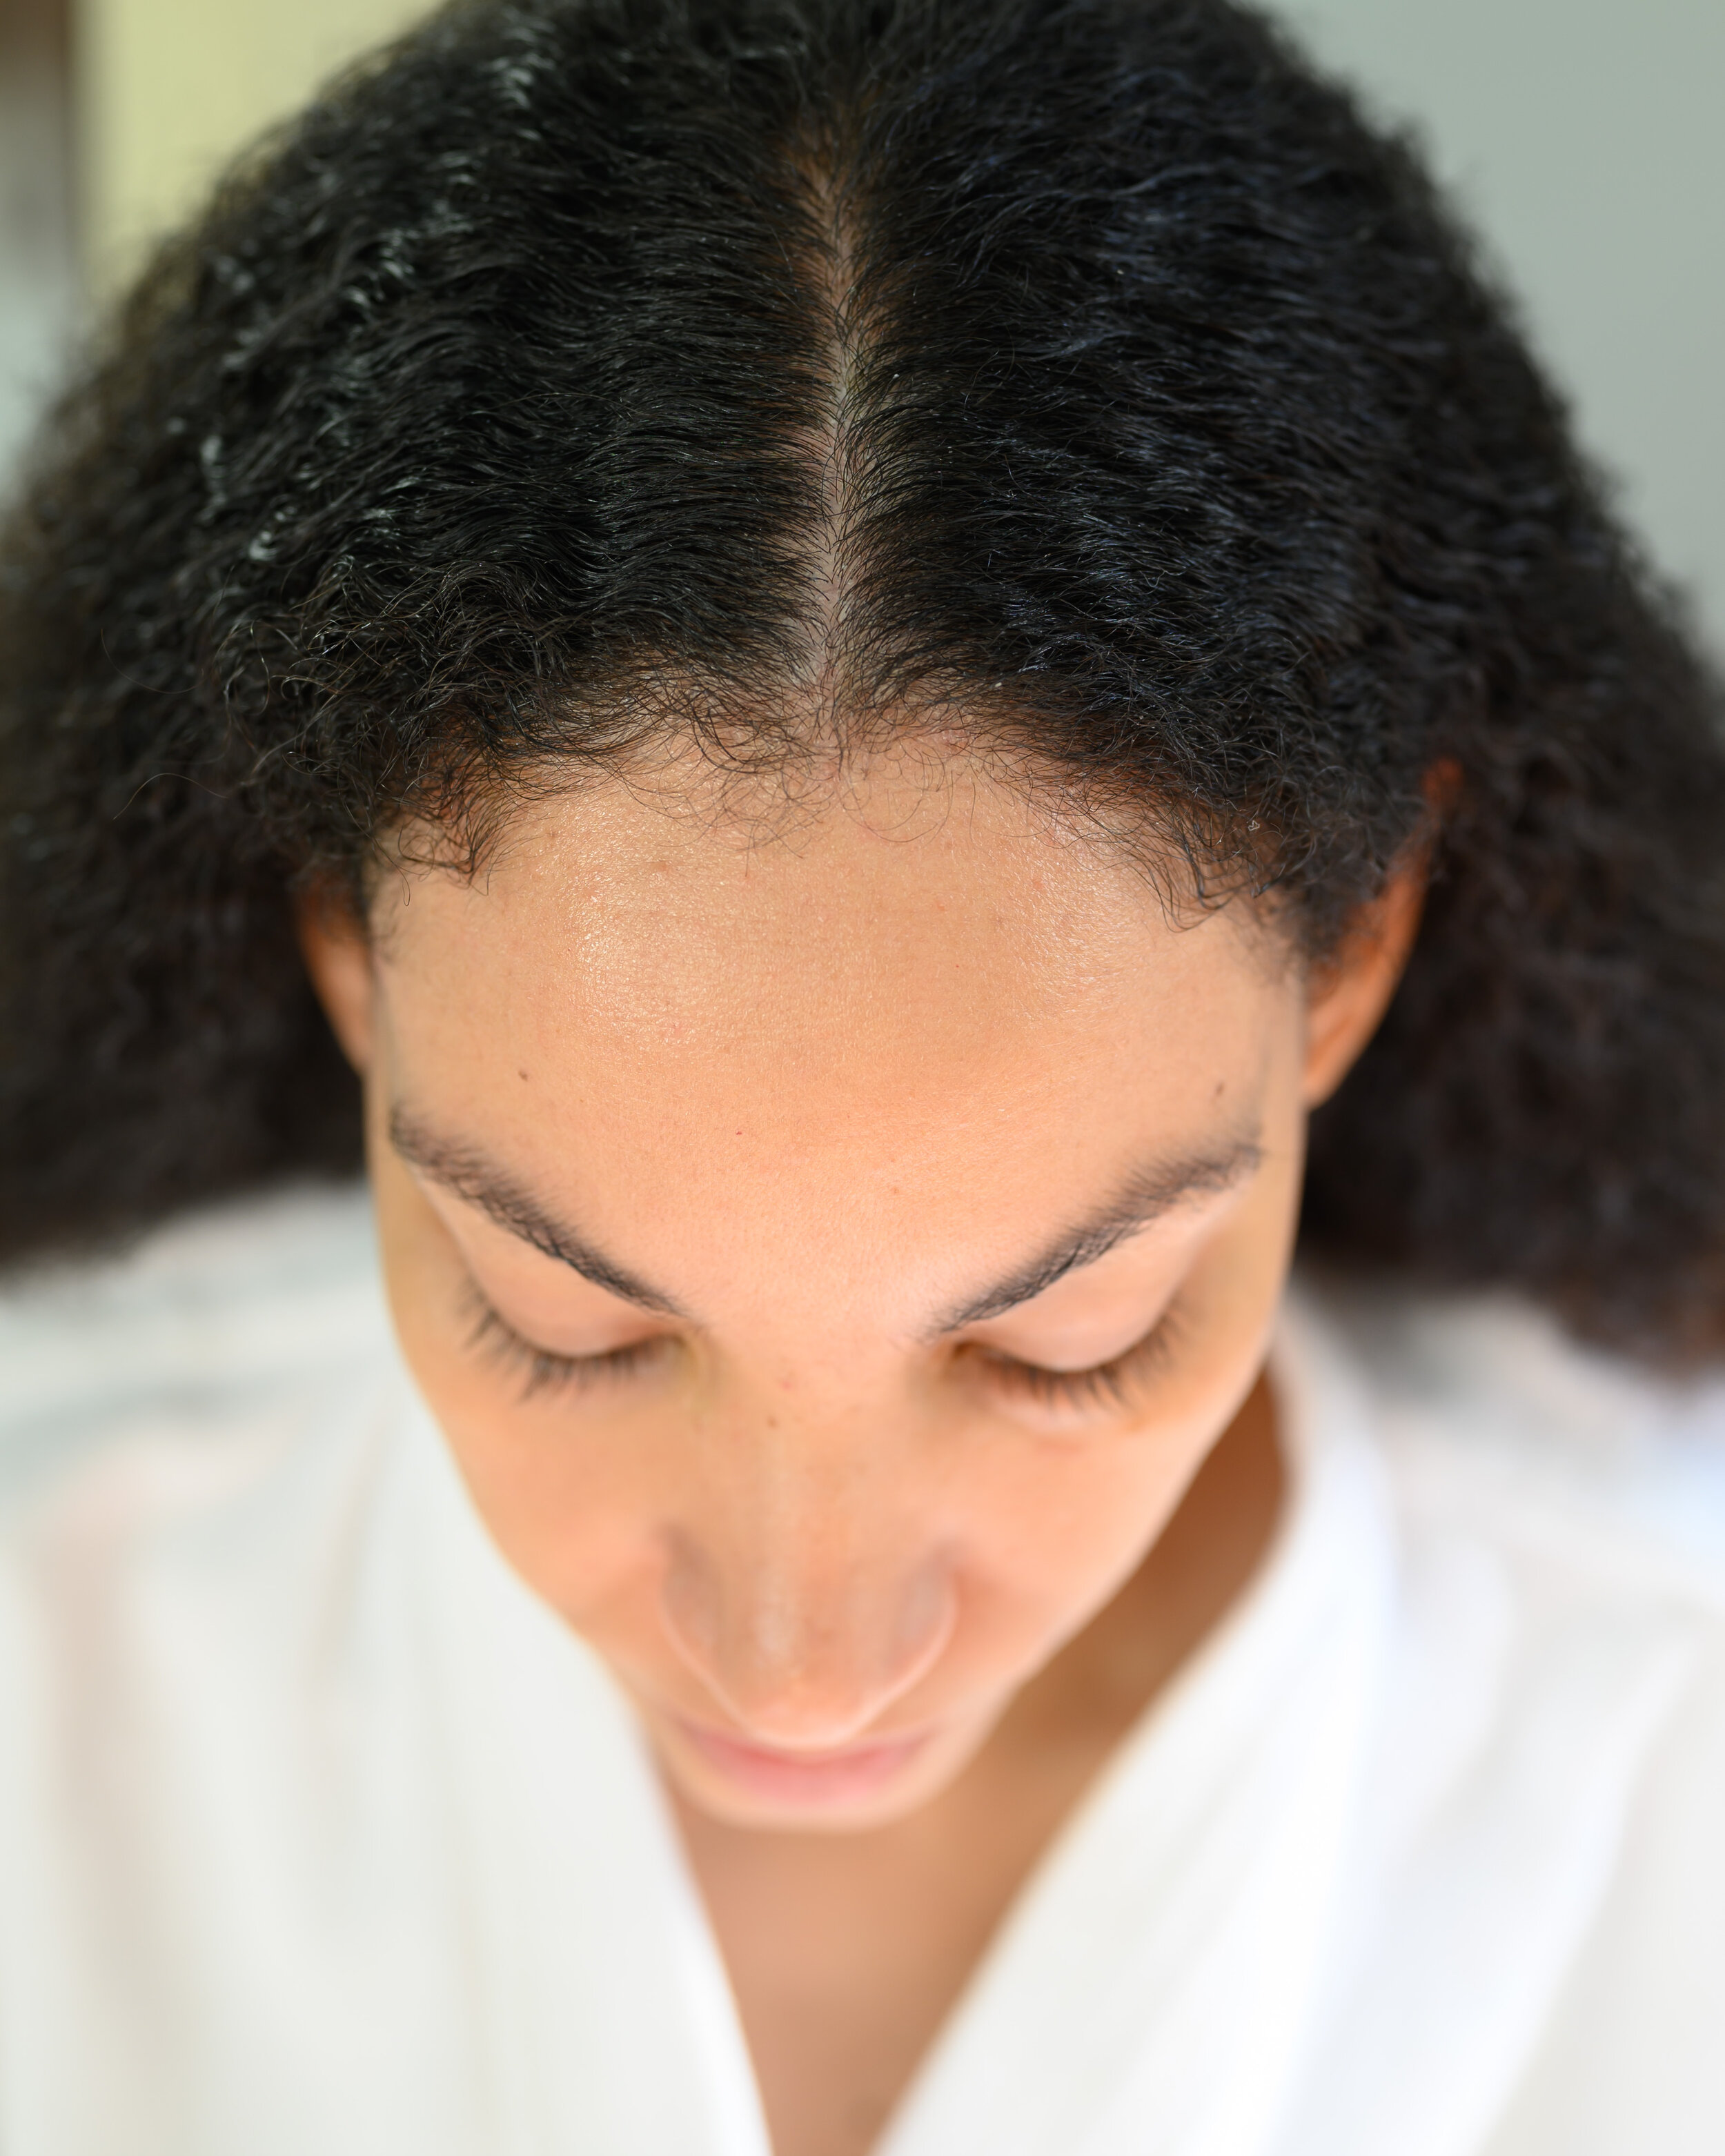 Natural Hair Growth Tip 14 Massage Your Scalp  For Long Healthy Natural  Kinky and Curly Hair  Your Dry Hair Days Are Over